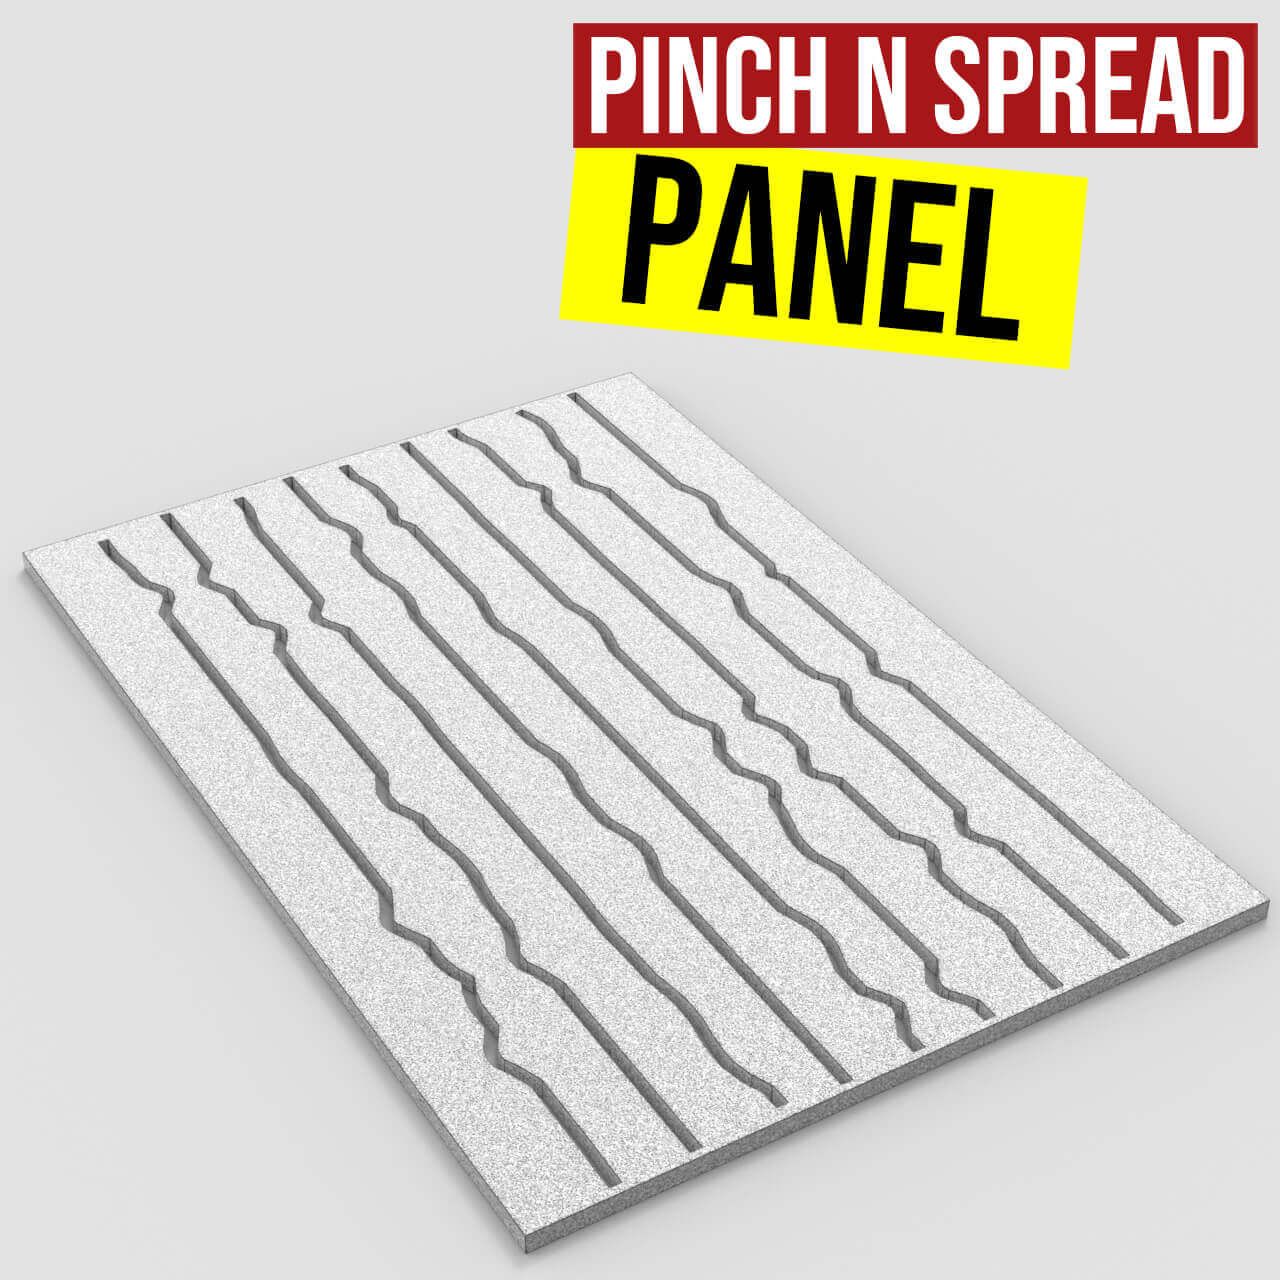 pinch and spread panel